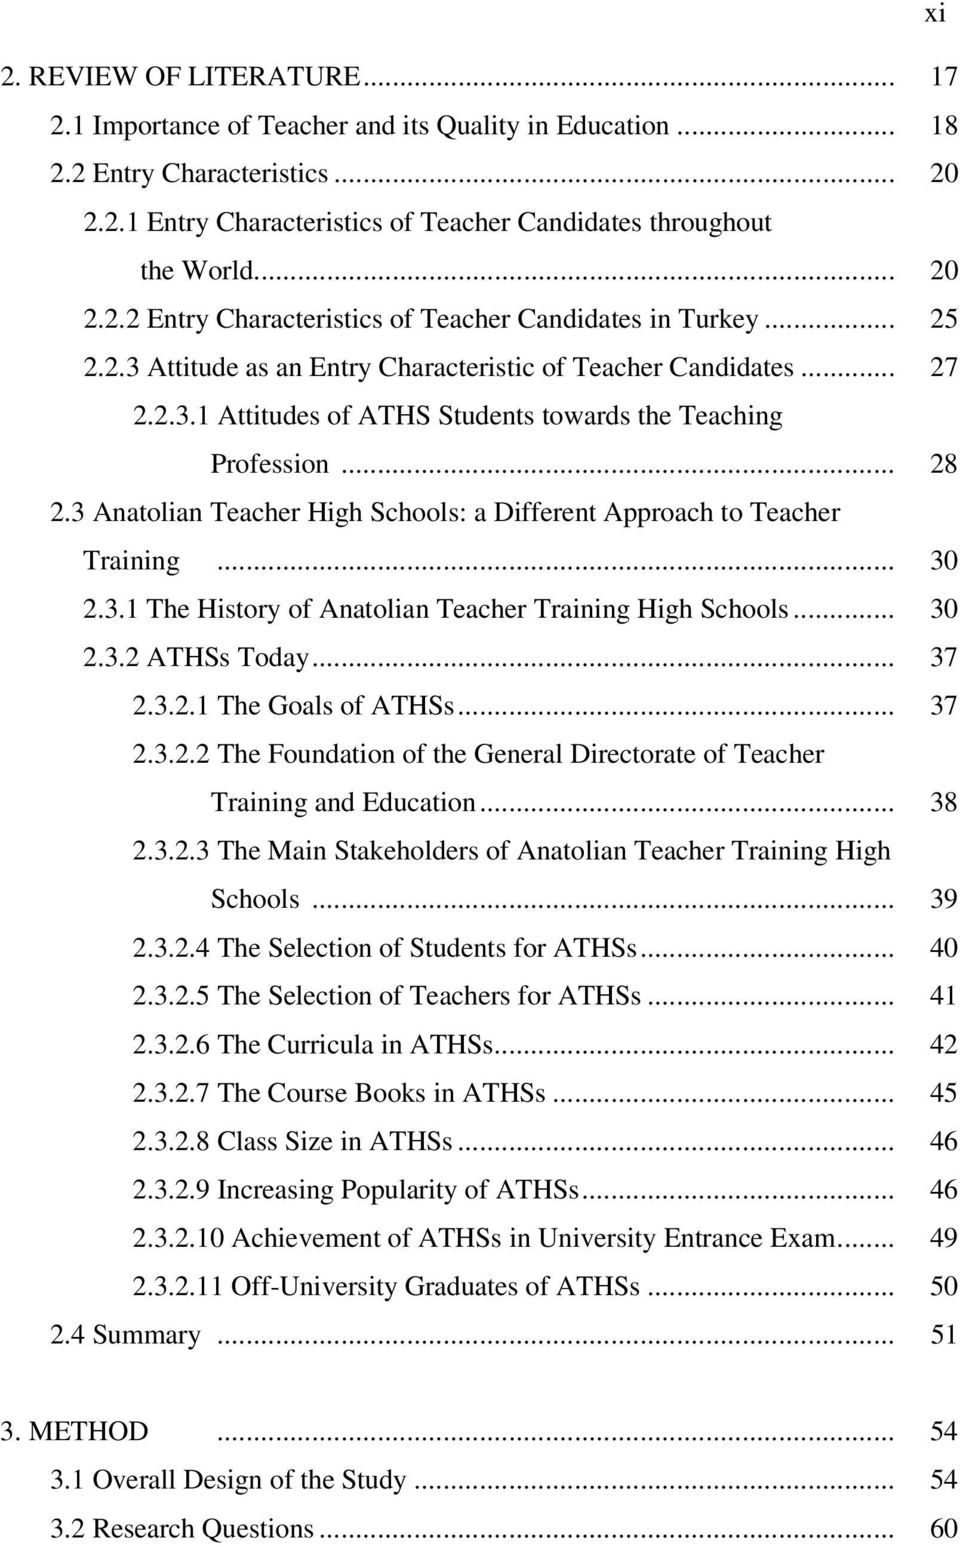 .. 28 2.3 Anatolian Teacher High Schools: a Different Approach to Teacher Training... 30 2.3.1 The History of Anatolian Teacher Training High Schools... 30 2.3.2 ATHSs Today... 37 2.3.2.1 The Goals of ATHSs.